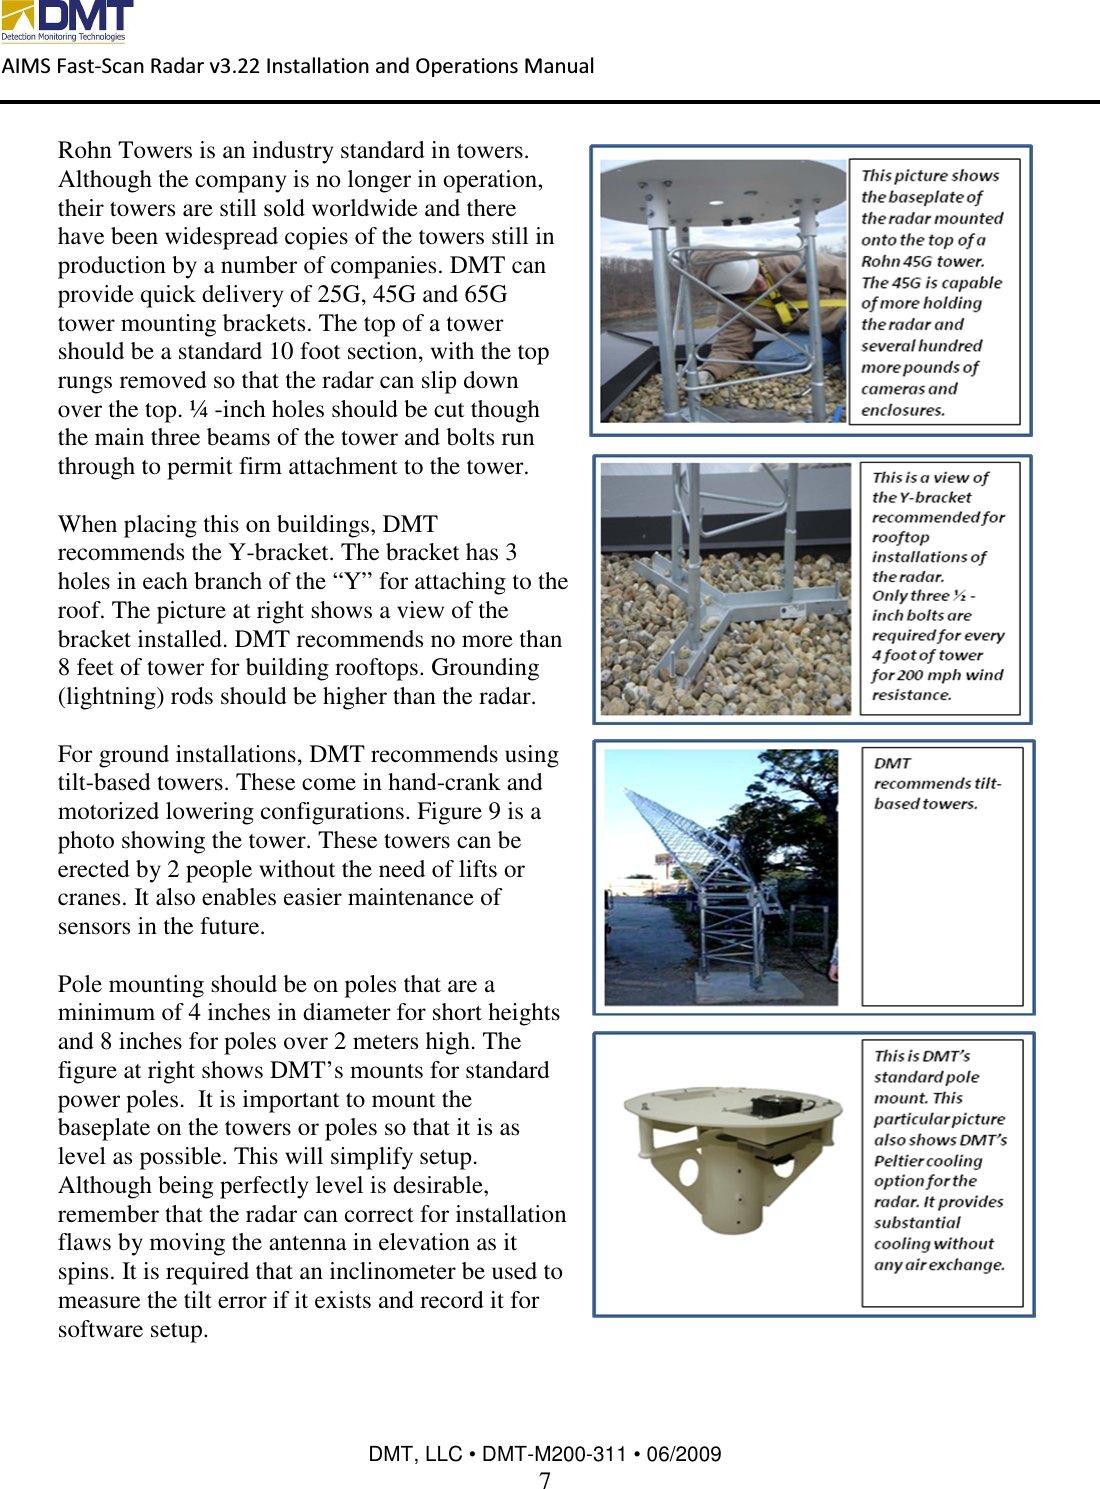  AIMS Fast-Scan Radar v3.22 Installation and Operations Manual    DMT, LLC • DMT-M200-311 • 06/2009 7  Rohn Towers is an industry standard in towers.  Although the company is no longer in operation, their towers are still sold worldwide and there have been widespread copies of the towers still in production by a number of companies. DMT can provide quick delivery of 25G, 45G and 65G tower mounting brackets. The top of a tower should be a standard 10 foot section, with the top rungs removed so that the radar can slip down over the top. ¼ -inch holes should be cut though the main three beams of the tower and bolts run through to permit firm attachment to the tower.   When placing this on buildings, DMT recommends the Y-bracket. The bracket has 3 holes in each branch of the “Y” for attaching to the roof. The picture at right shows a view of the bracket installed. DMT recommends no more than 8 feet of tower for building rooftops. Grounding (lightning) rods should be higher than the radar.  For ground installations, DMT recommends using tilt-based towers. These come in hand-crank and motorized lowering configurations. Figure 9 is a photo showing the tower. These towers can be erected by 2 people without the need of lifts or cranes. It also enables easier maintenance of sensors in the future.    Pole mounting should be on poles that are a minimum of 4 inches in diameter for short heights and 8 inches for poles over 2 meters high. The figure at right shows DMT’s mounts for standard power poles.  It is important to mount the baseplate on the towers or poles so that it is as level as possible. This will simplify setup. Although being perfectly level is desirable, remember that the radar can correct for installation flaws by moving the antenna in elevation as it spins. It is required that an inclinometer be used to measure the tilt error if it exists and record it for software setup.  